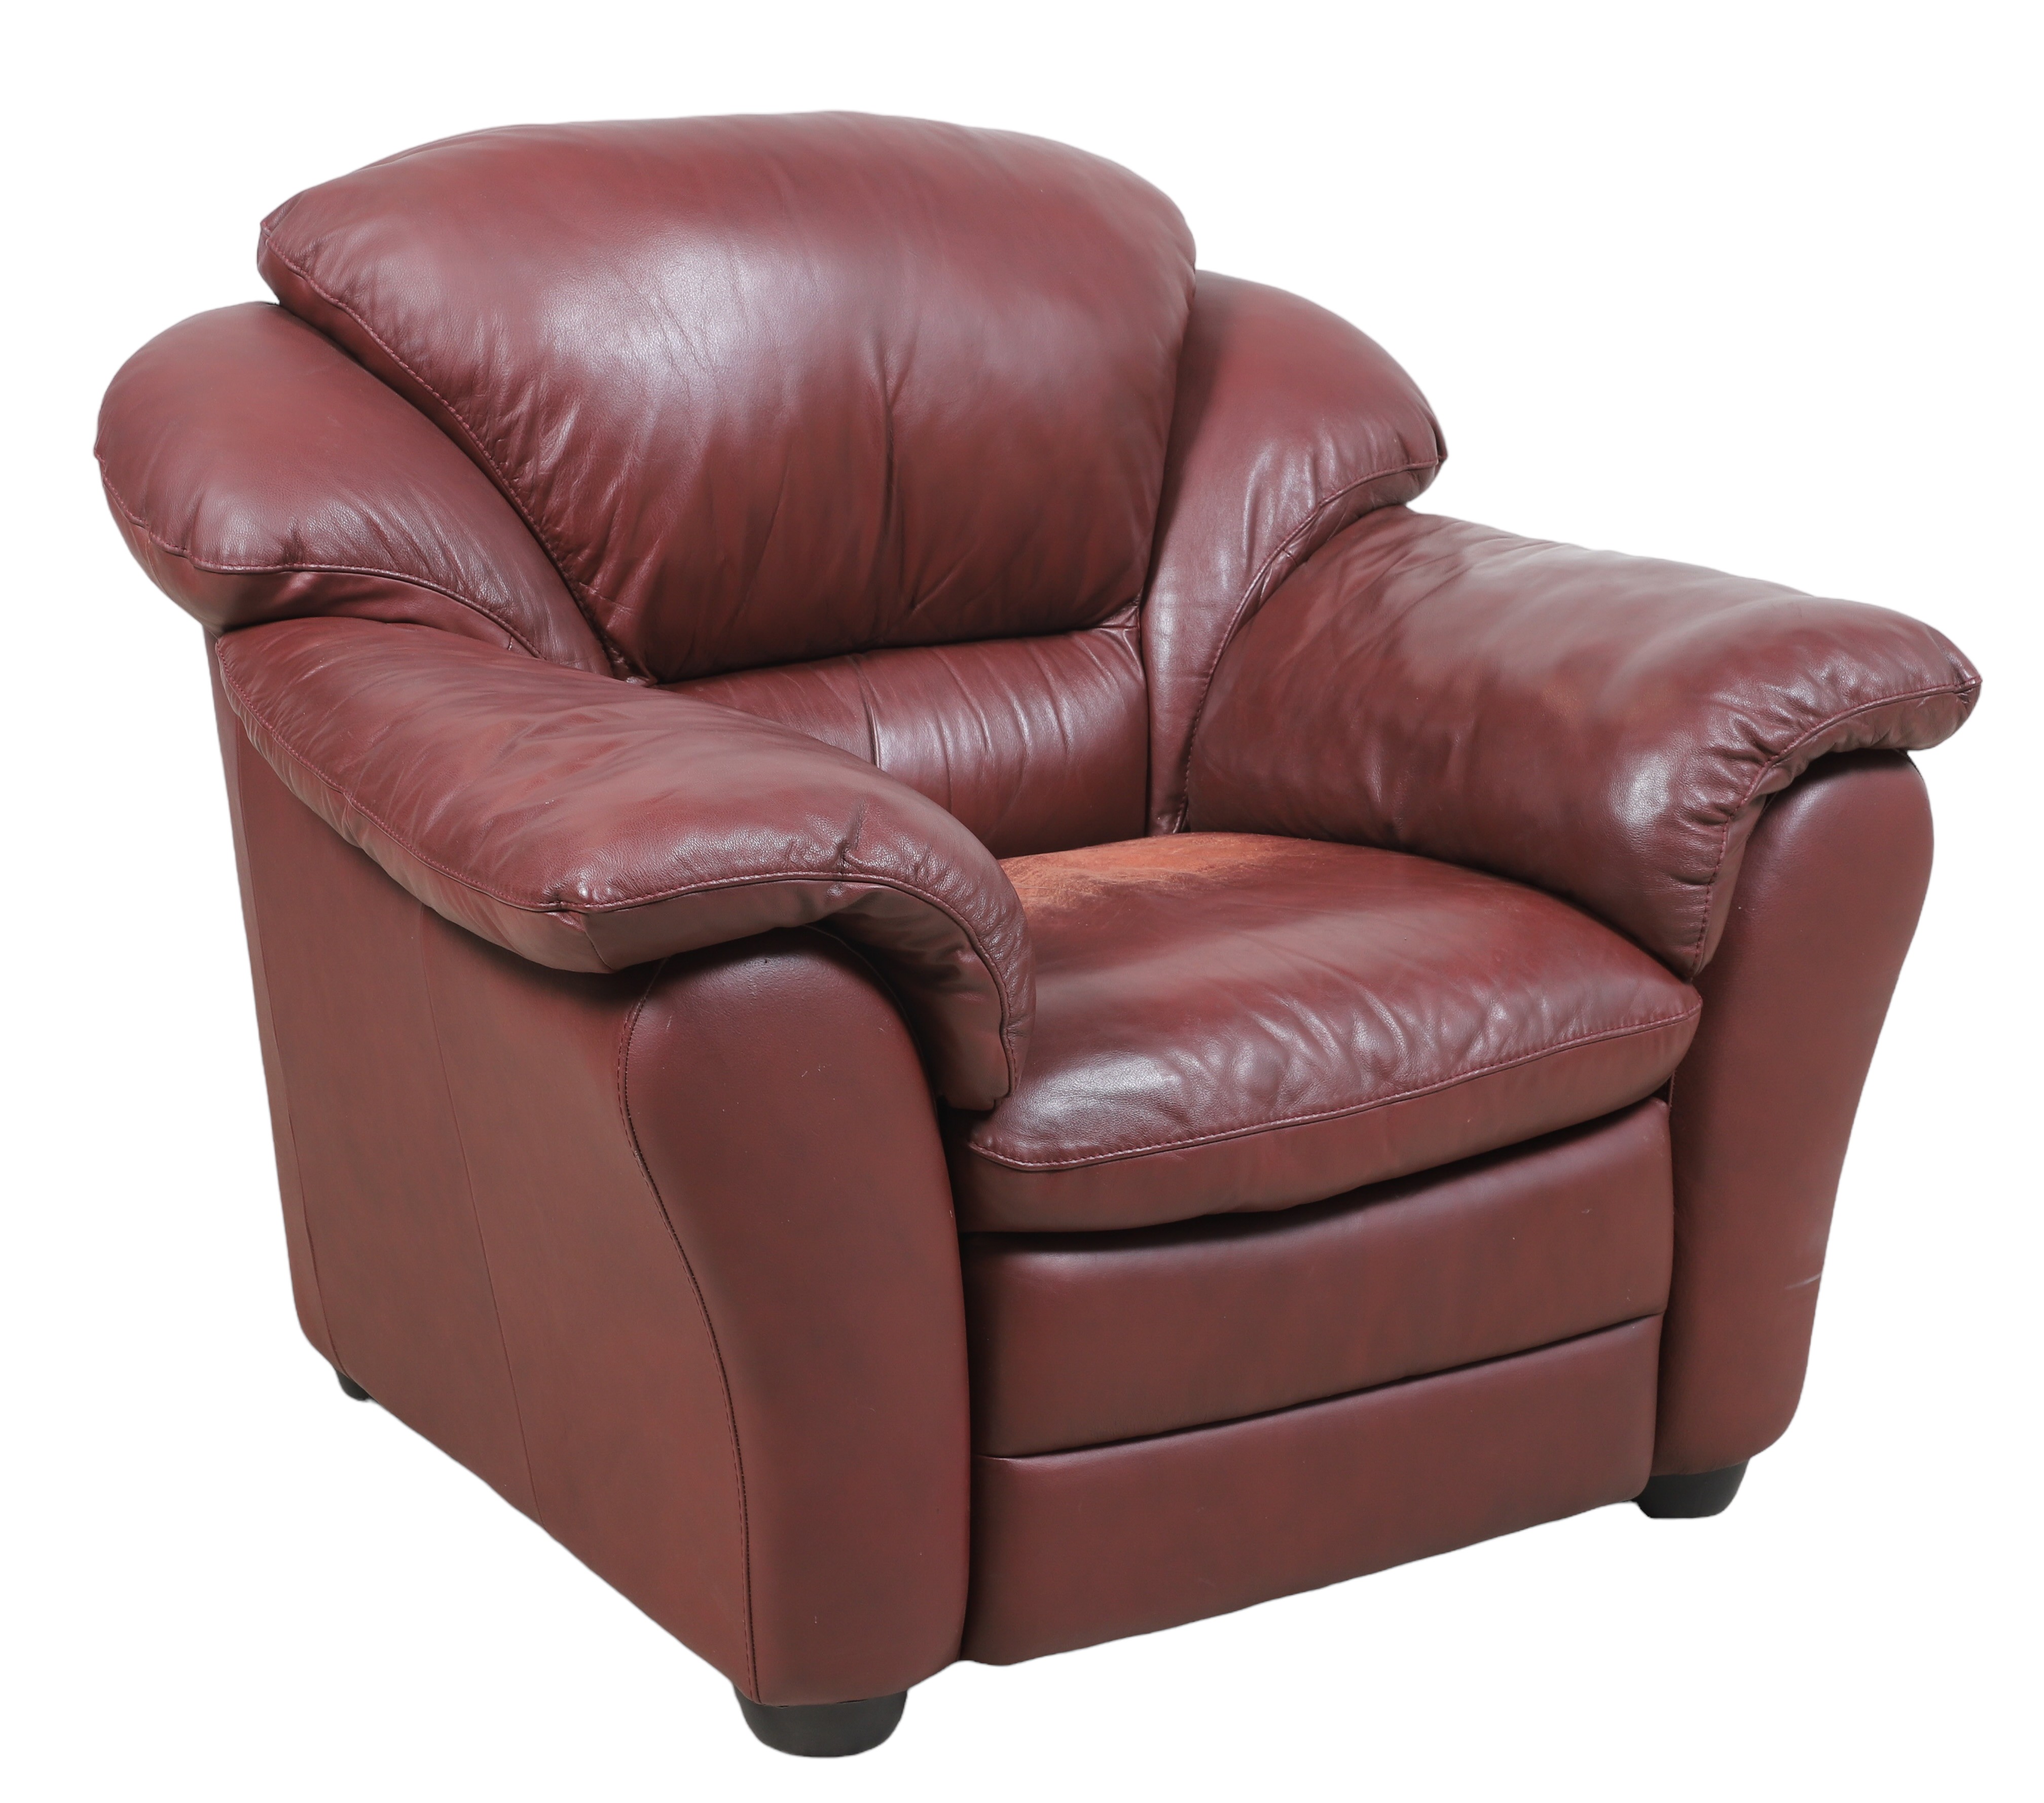 Italsofa Contemporary leather lounge